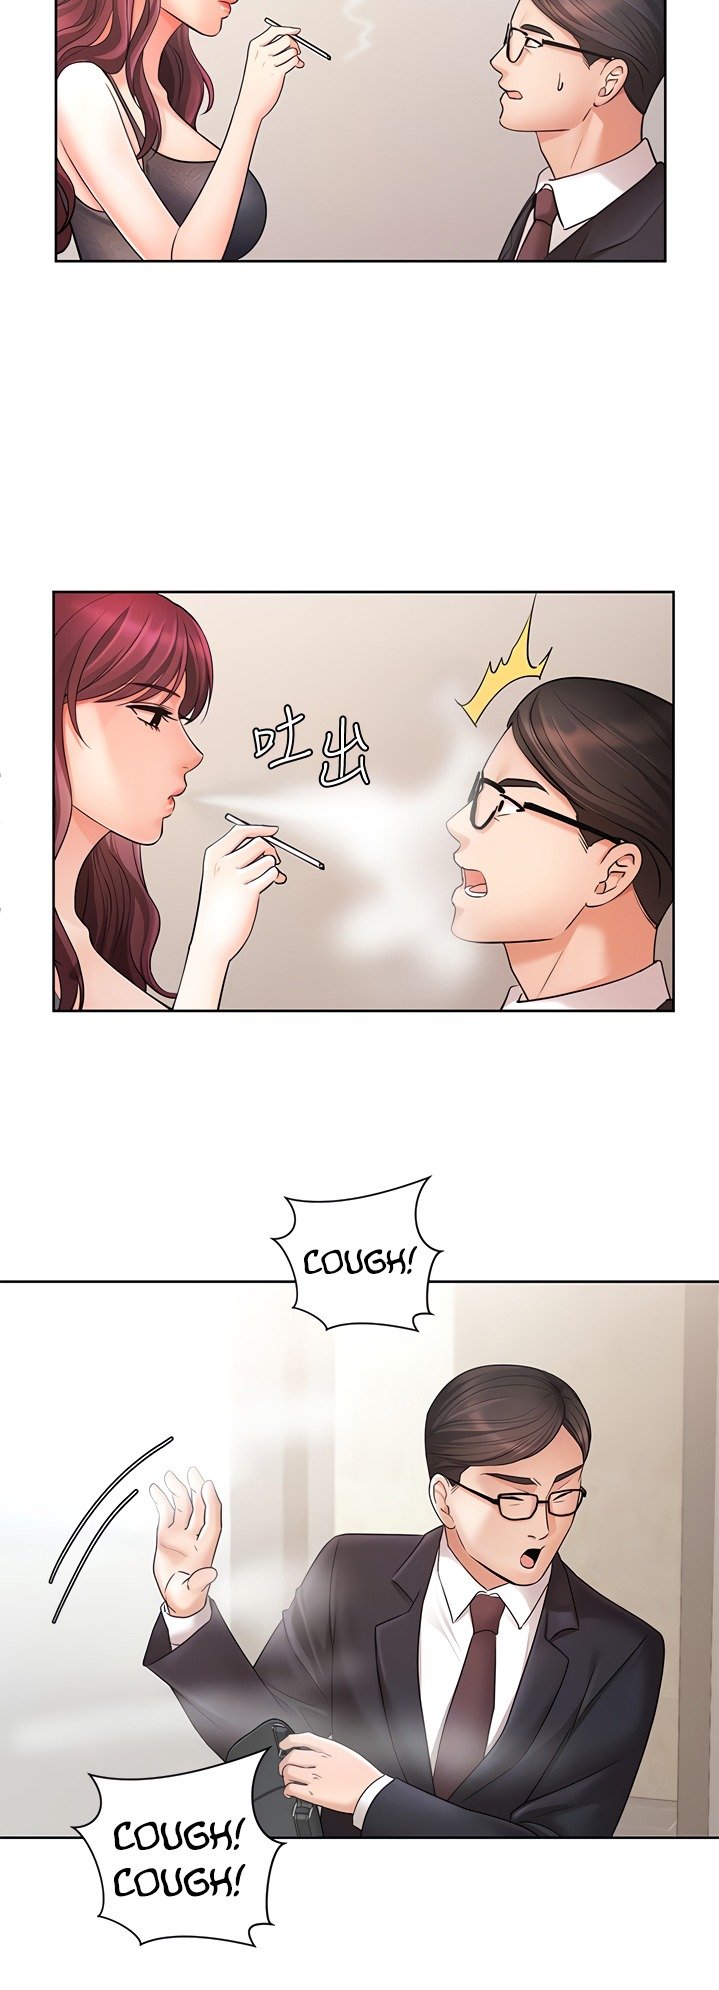 sold-out-girl-chap-4-19